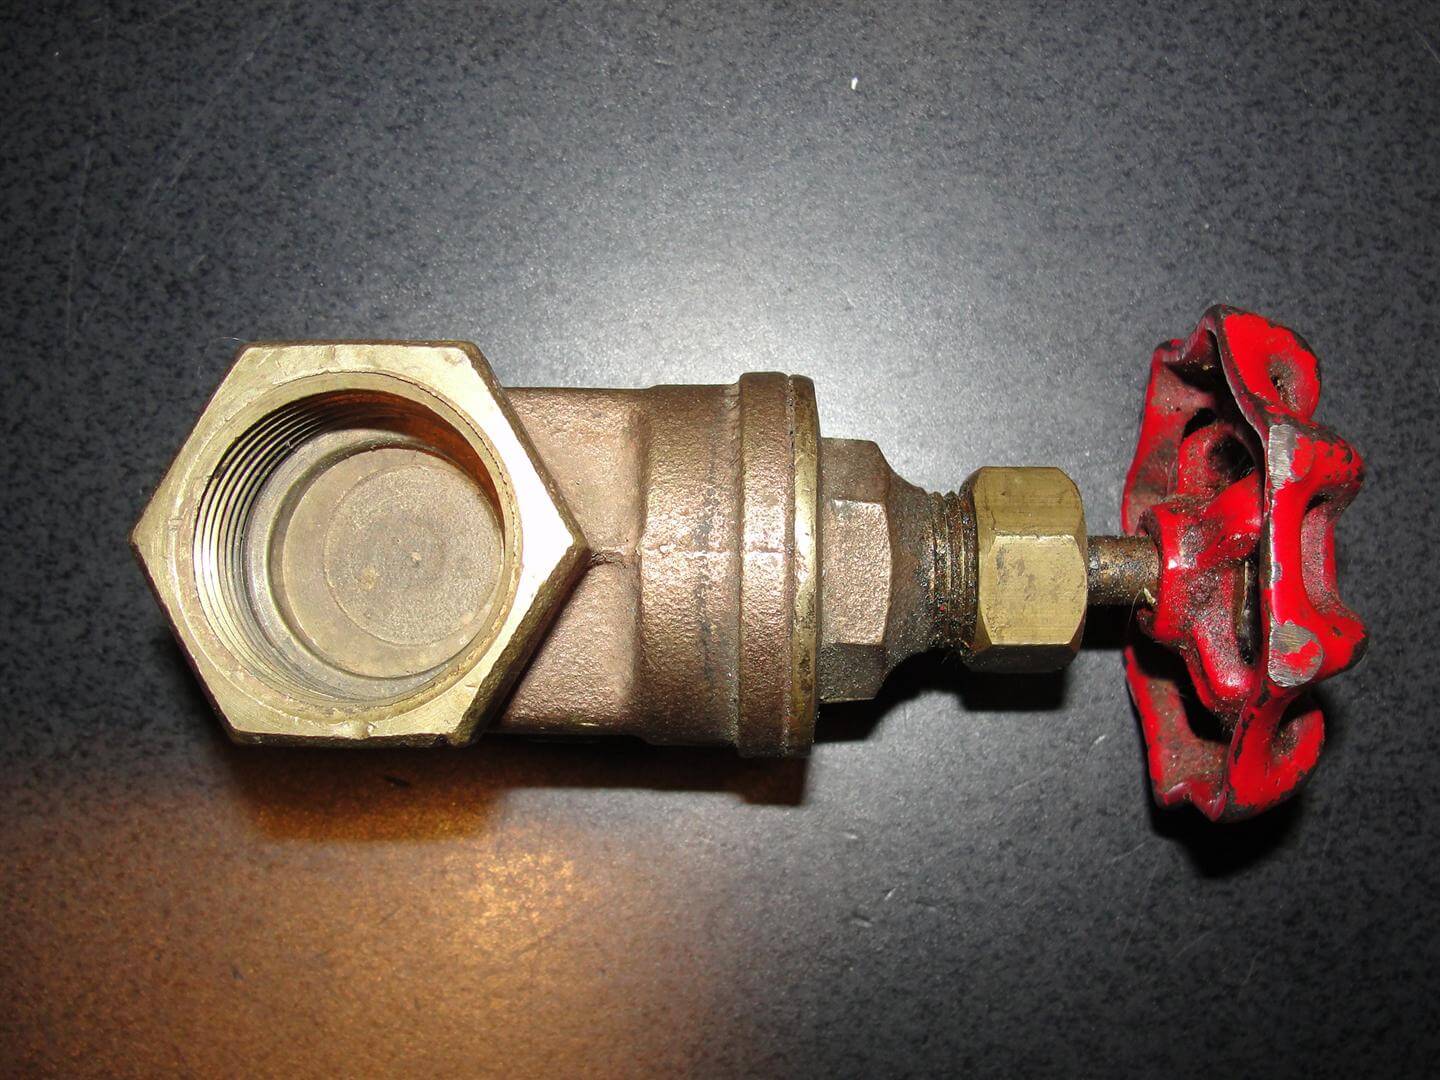 The Importance and Locations of Water Shut-Off Valve